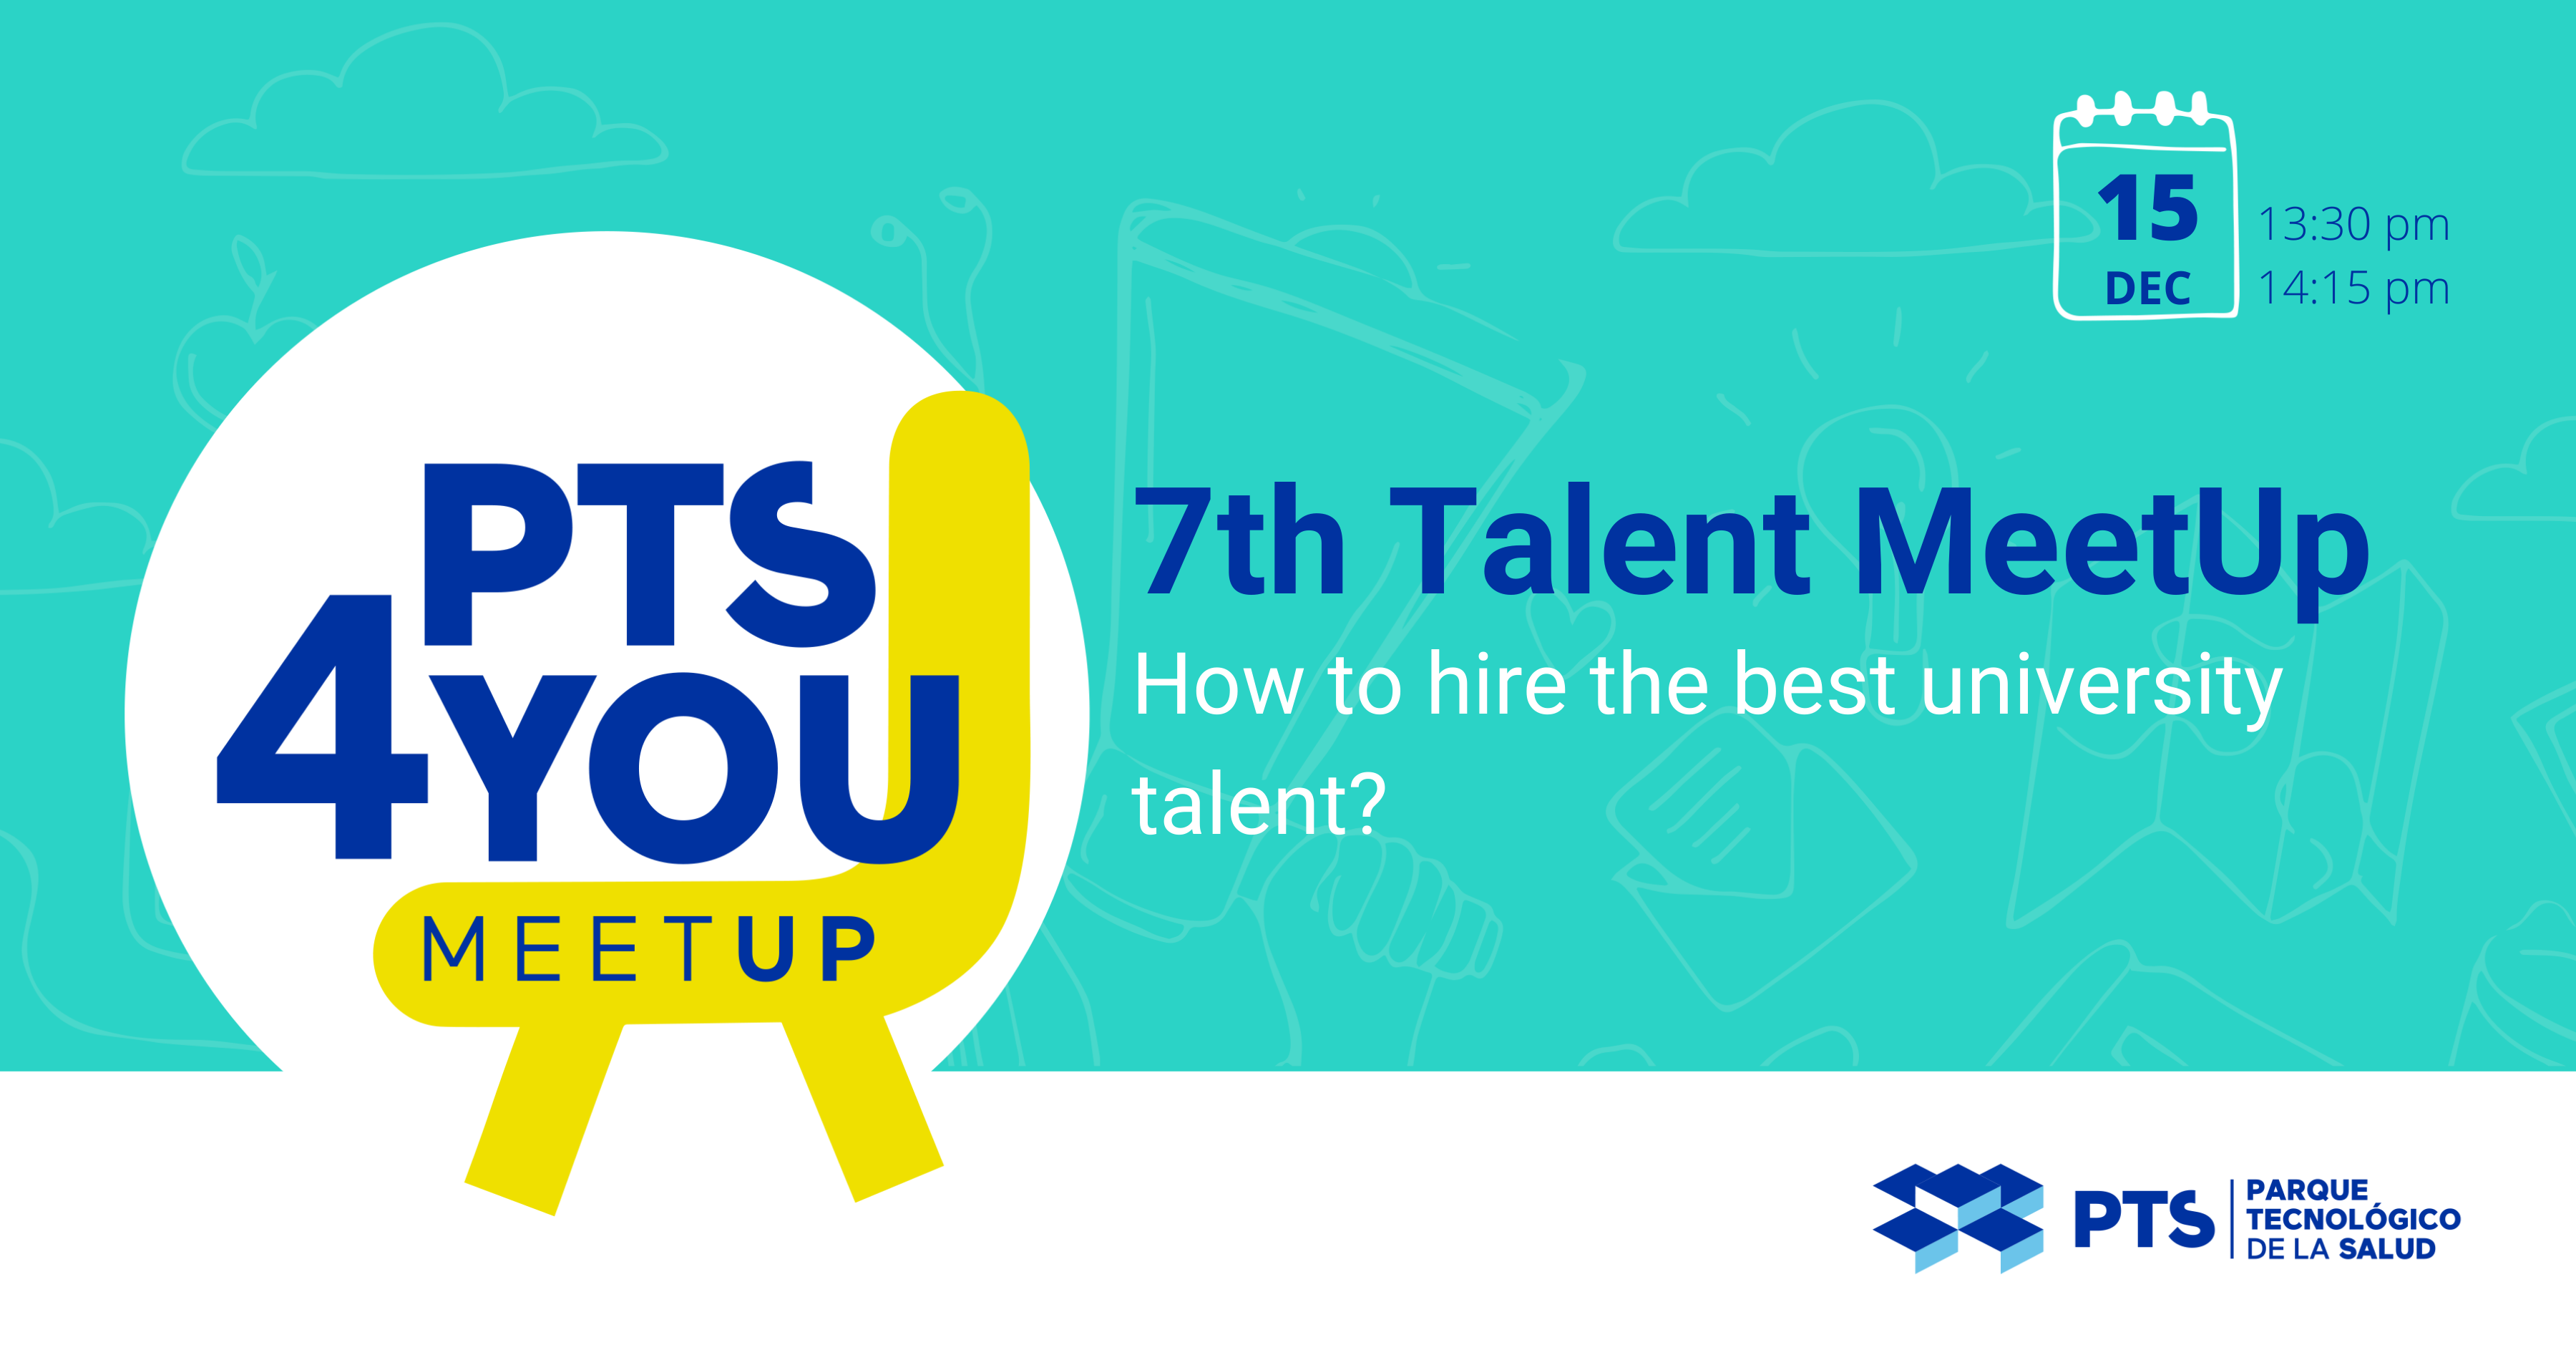 Featured image for “7th Talent MeetUp”